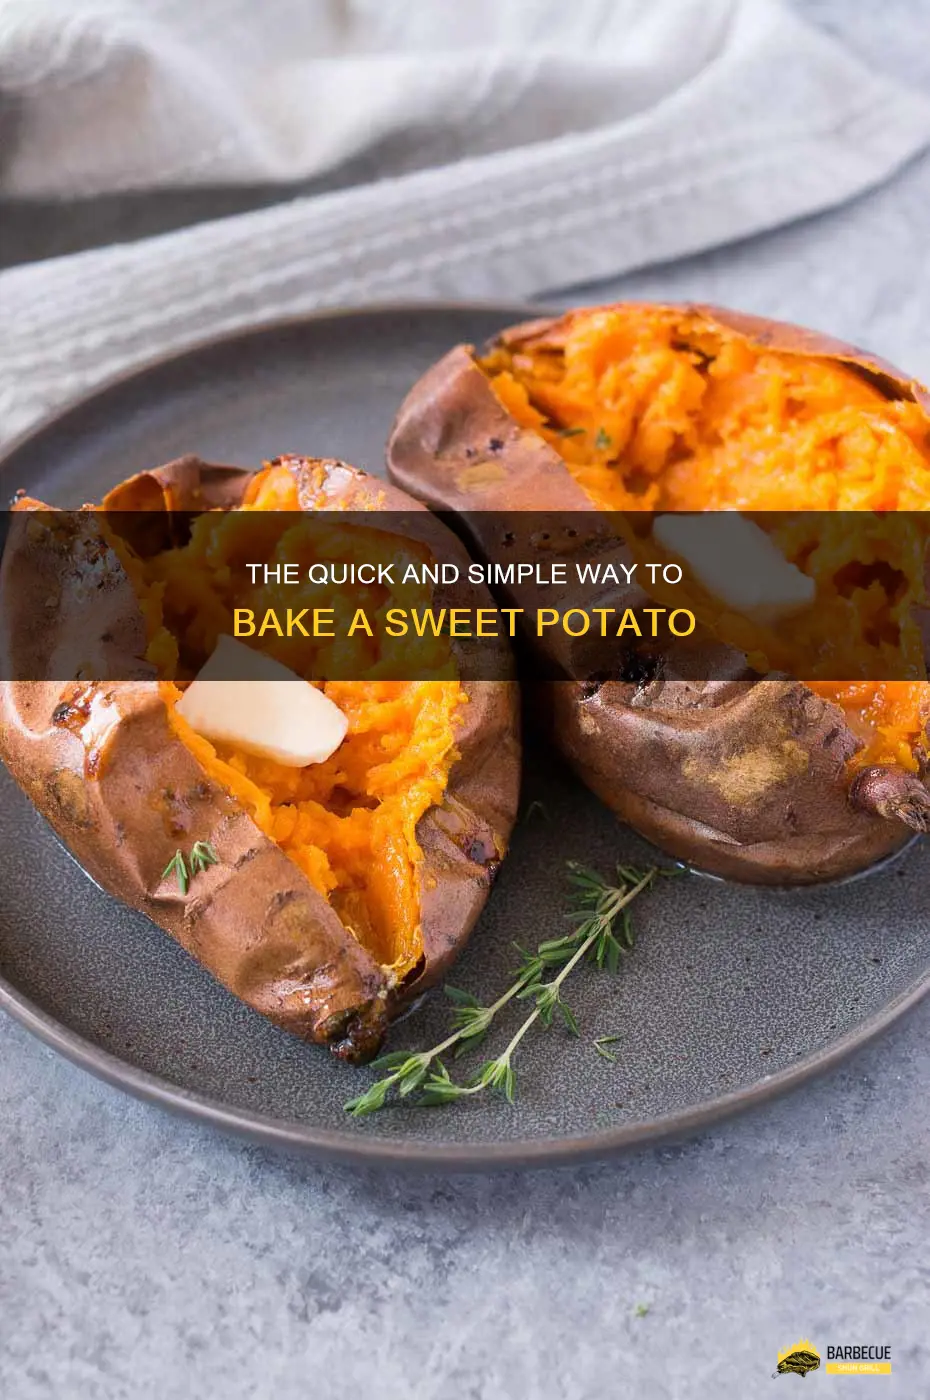 The Quick And Simple Way To Bake A Sweet Potato | ShunGrill